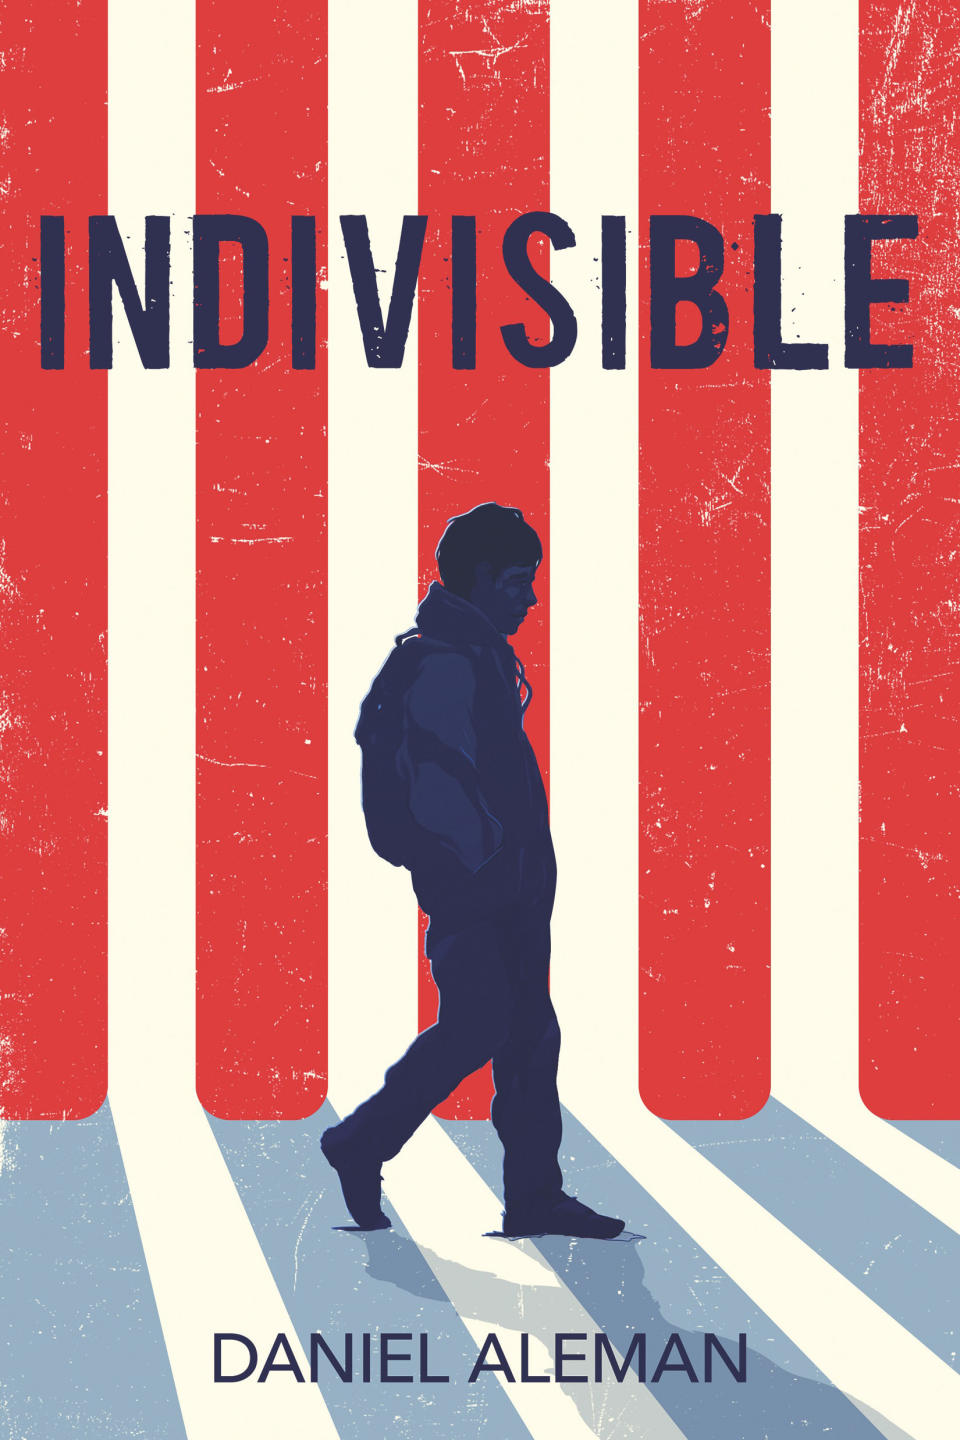 Author Daniel Aleman's debut young adult novel, “Indivisible.” (Little, Brown Books for Young Readers)